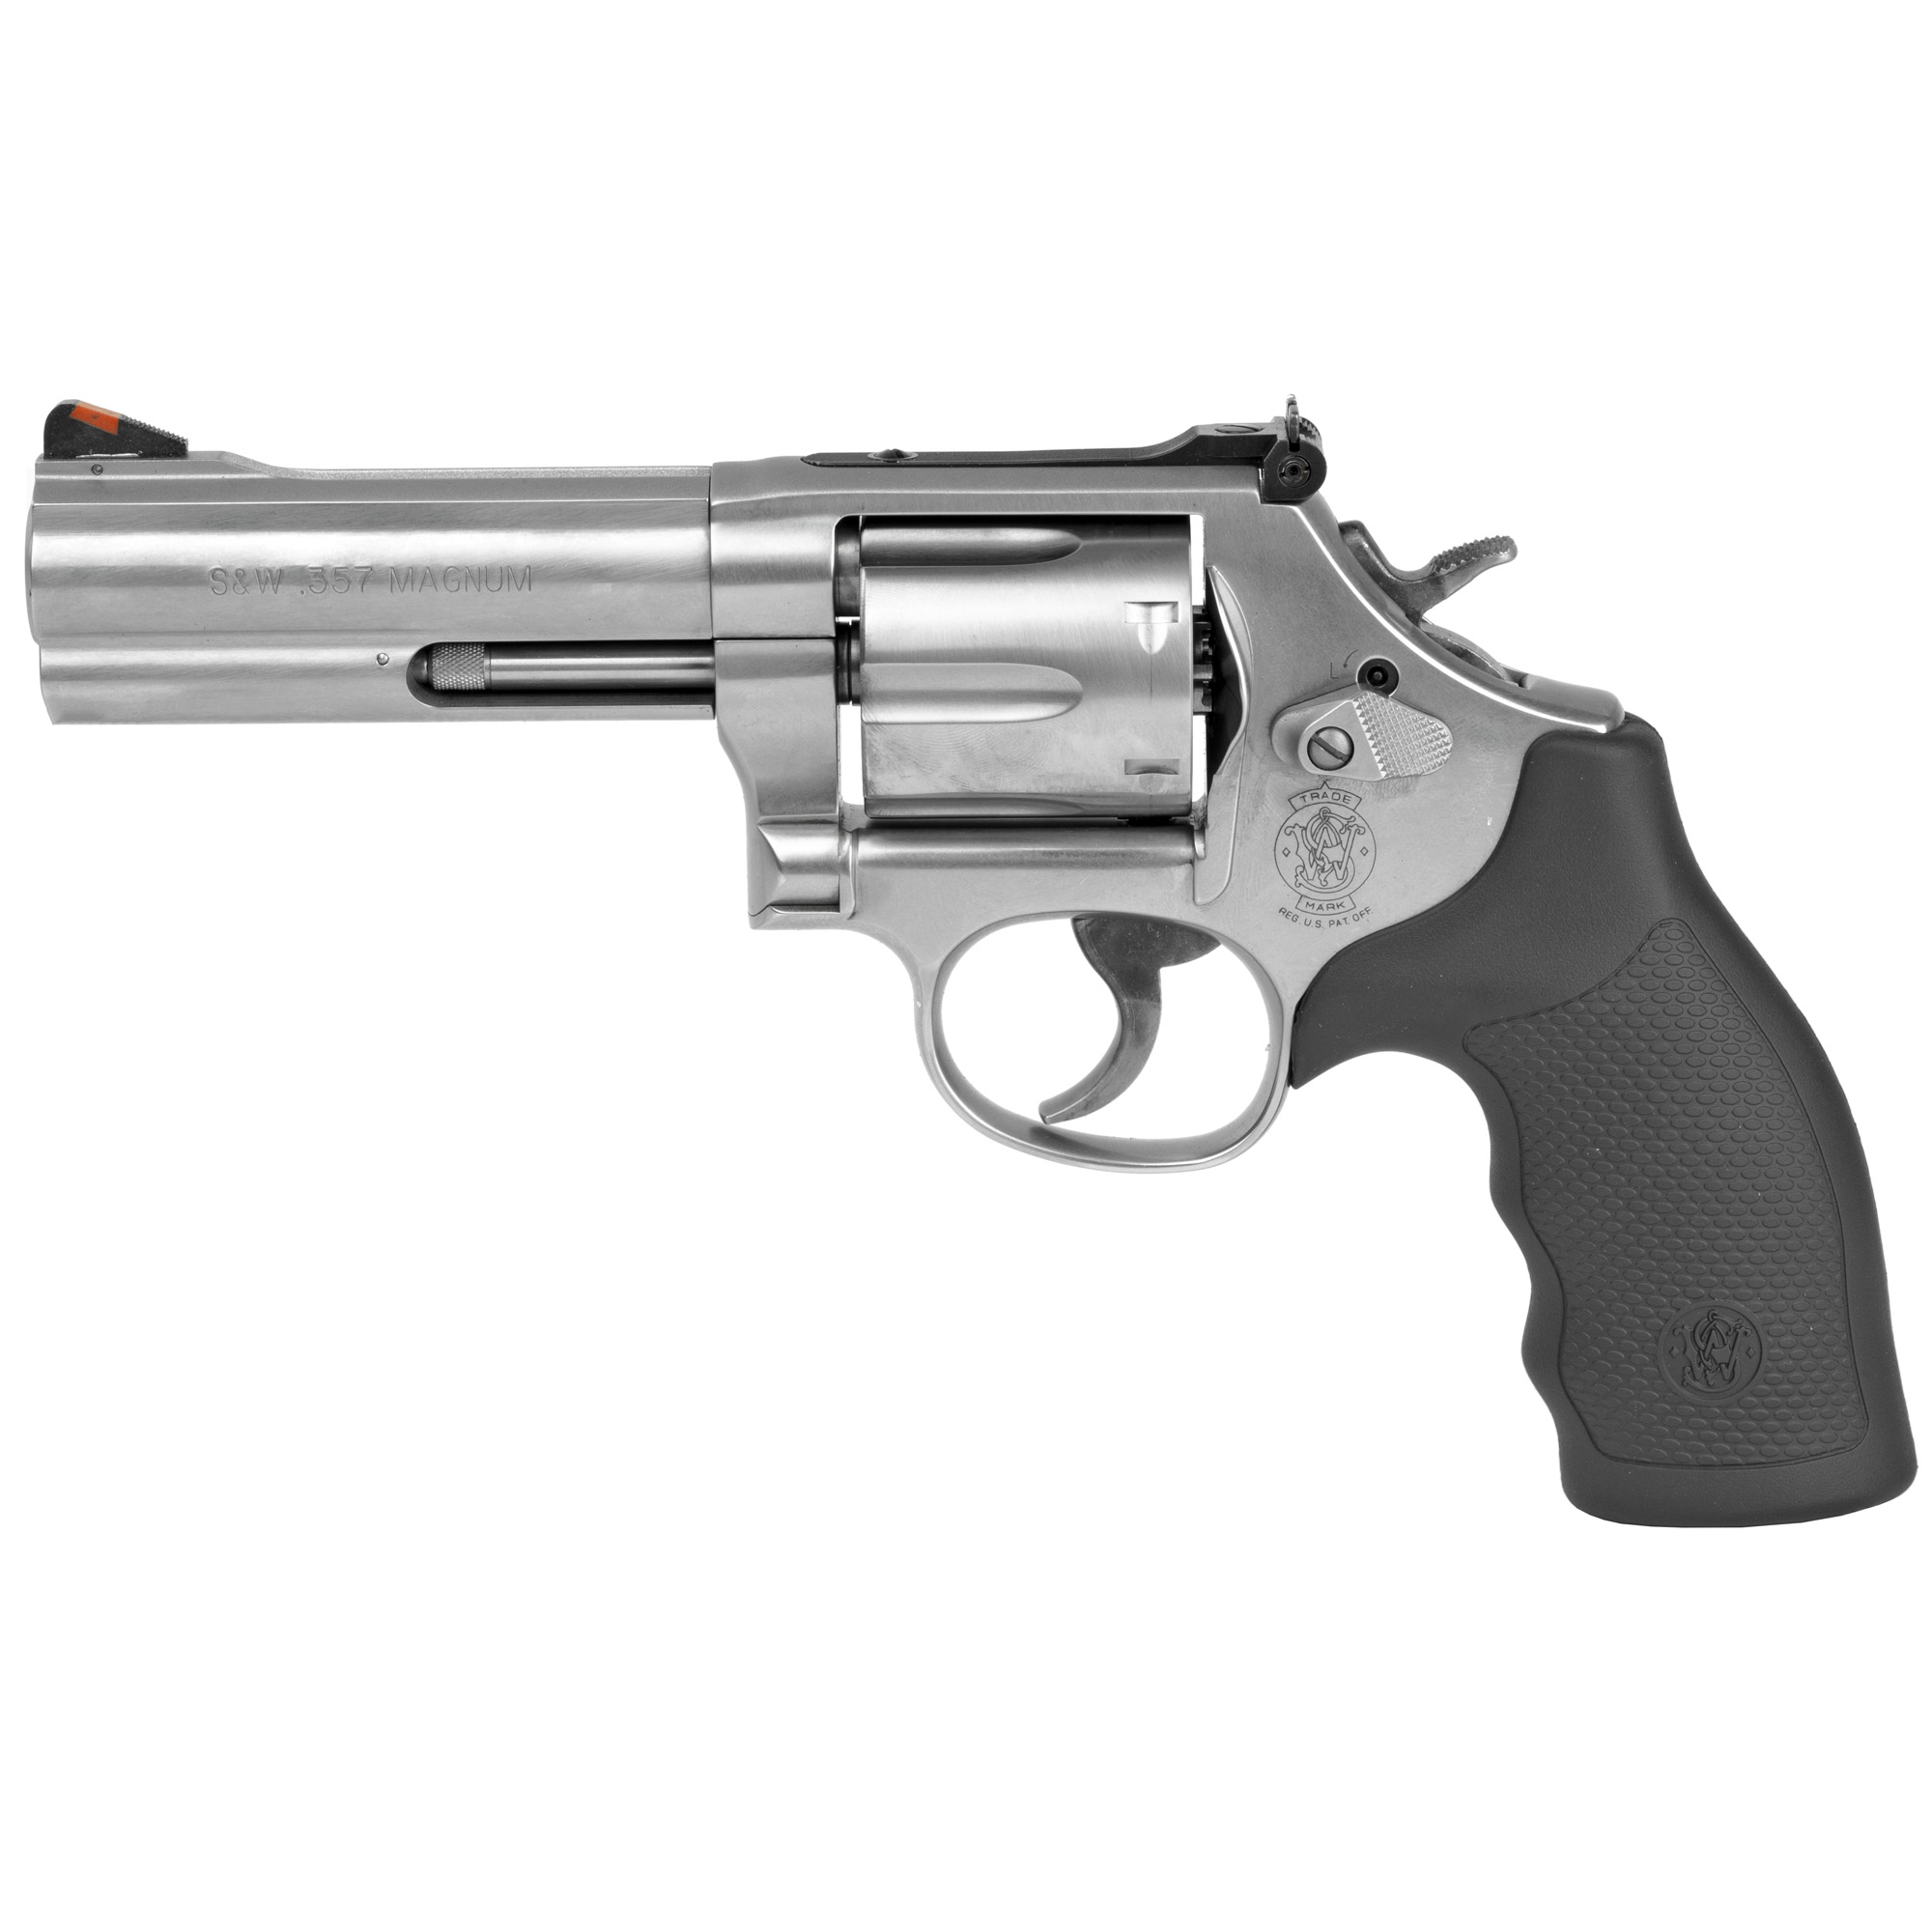 S&W 686-6 357MAG 4.13 6RD STS RR/WO